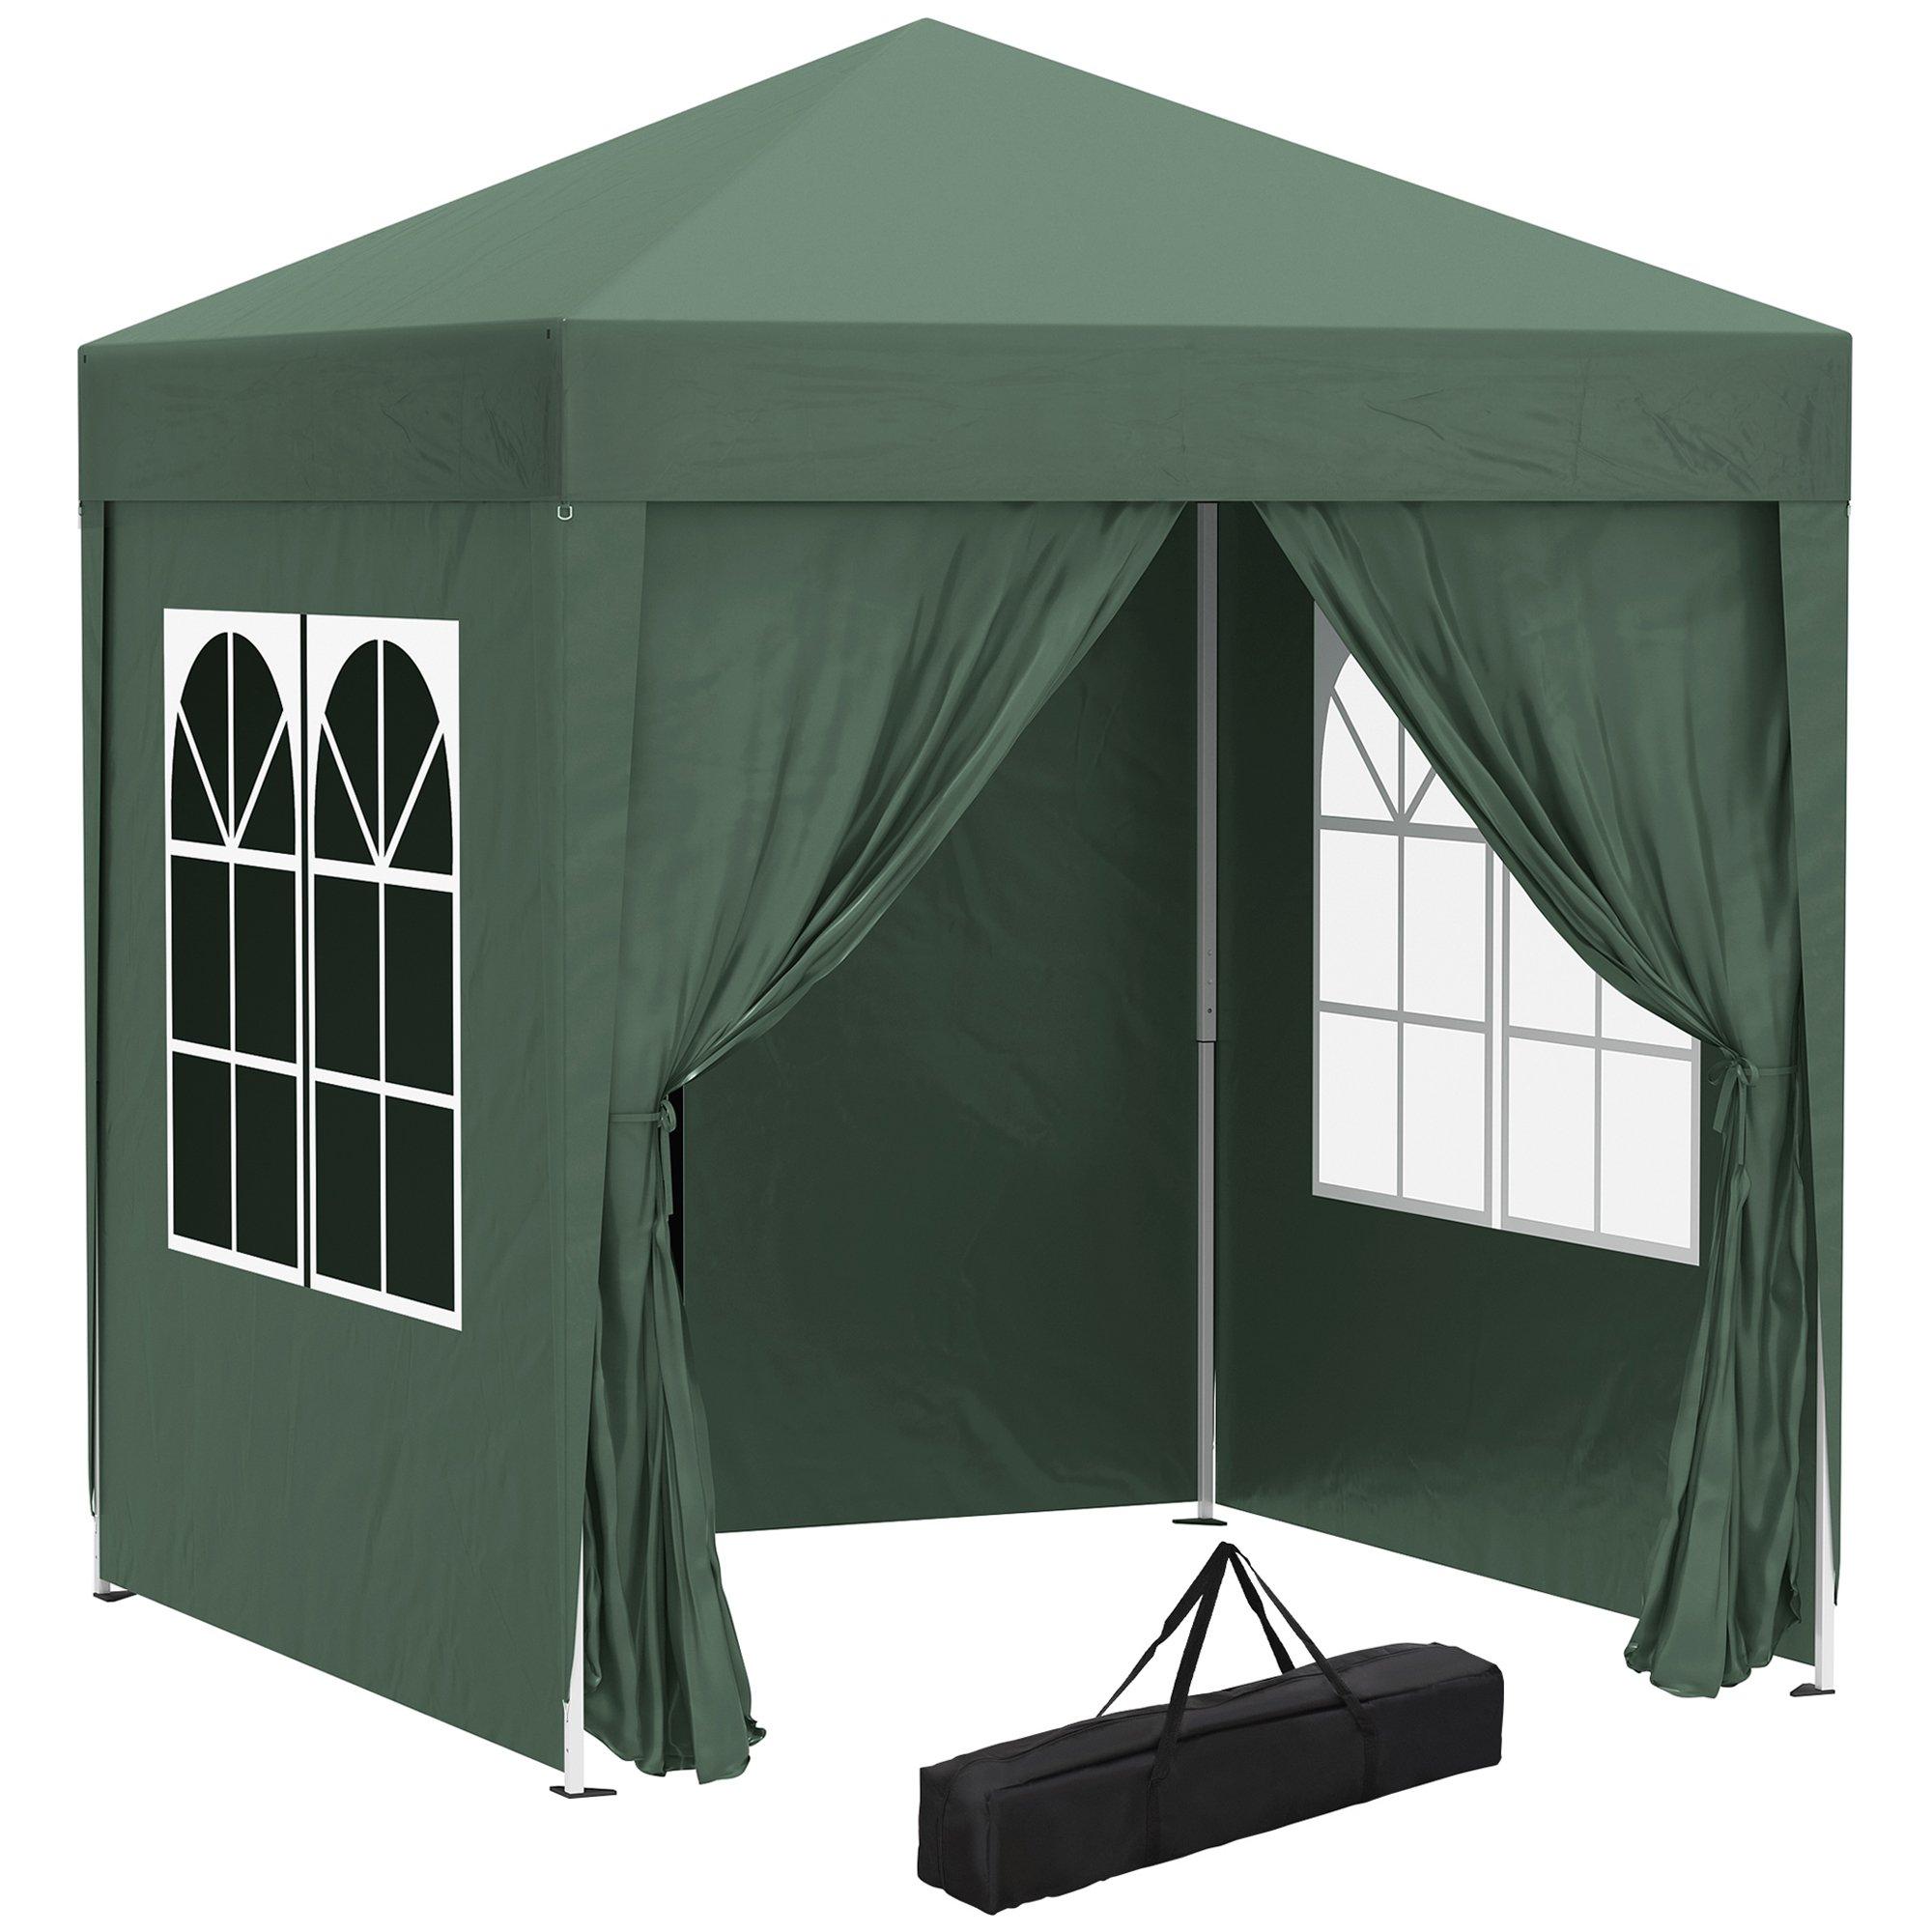 Outsunny Pop Up Gazebo Outdoors Water proof Green 2000 mm x 2000 mm x 2450 mm